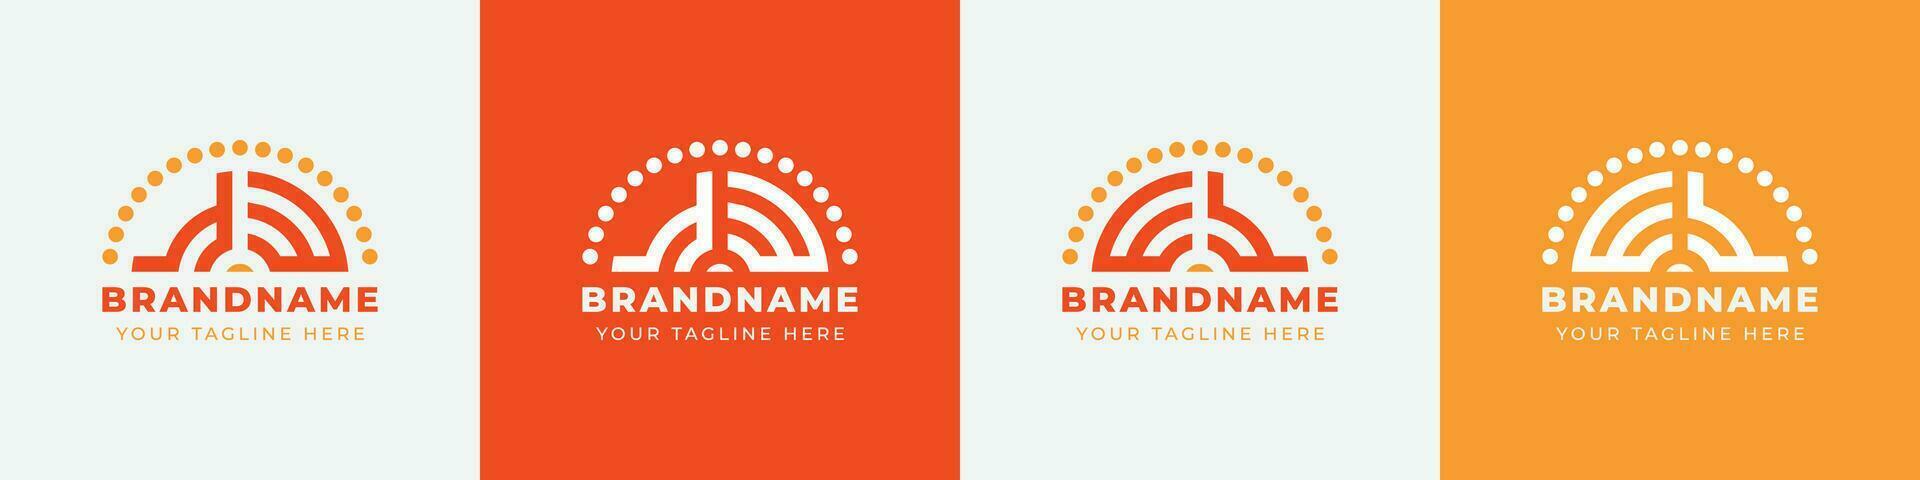 Letter WY and YW Sunrise  Logo Set, suitable for any business with WY or YW initials. vector